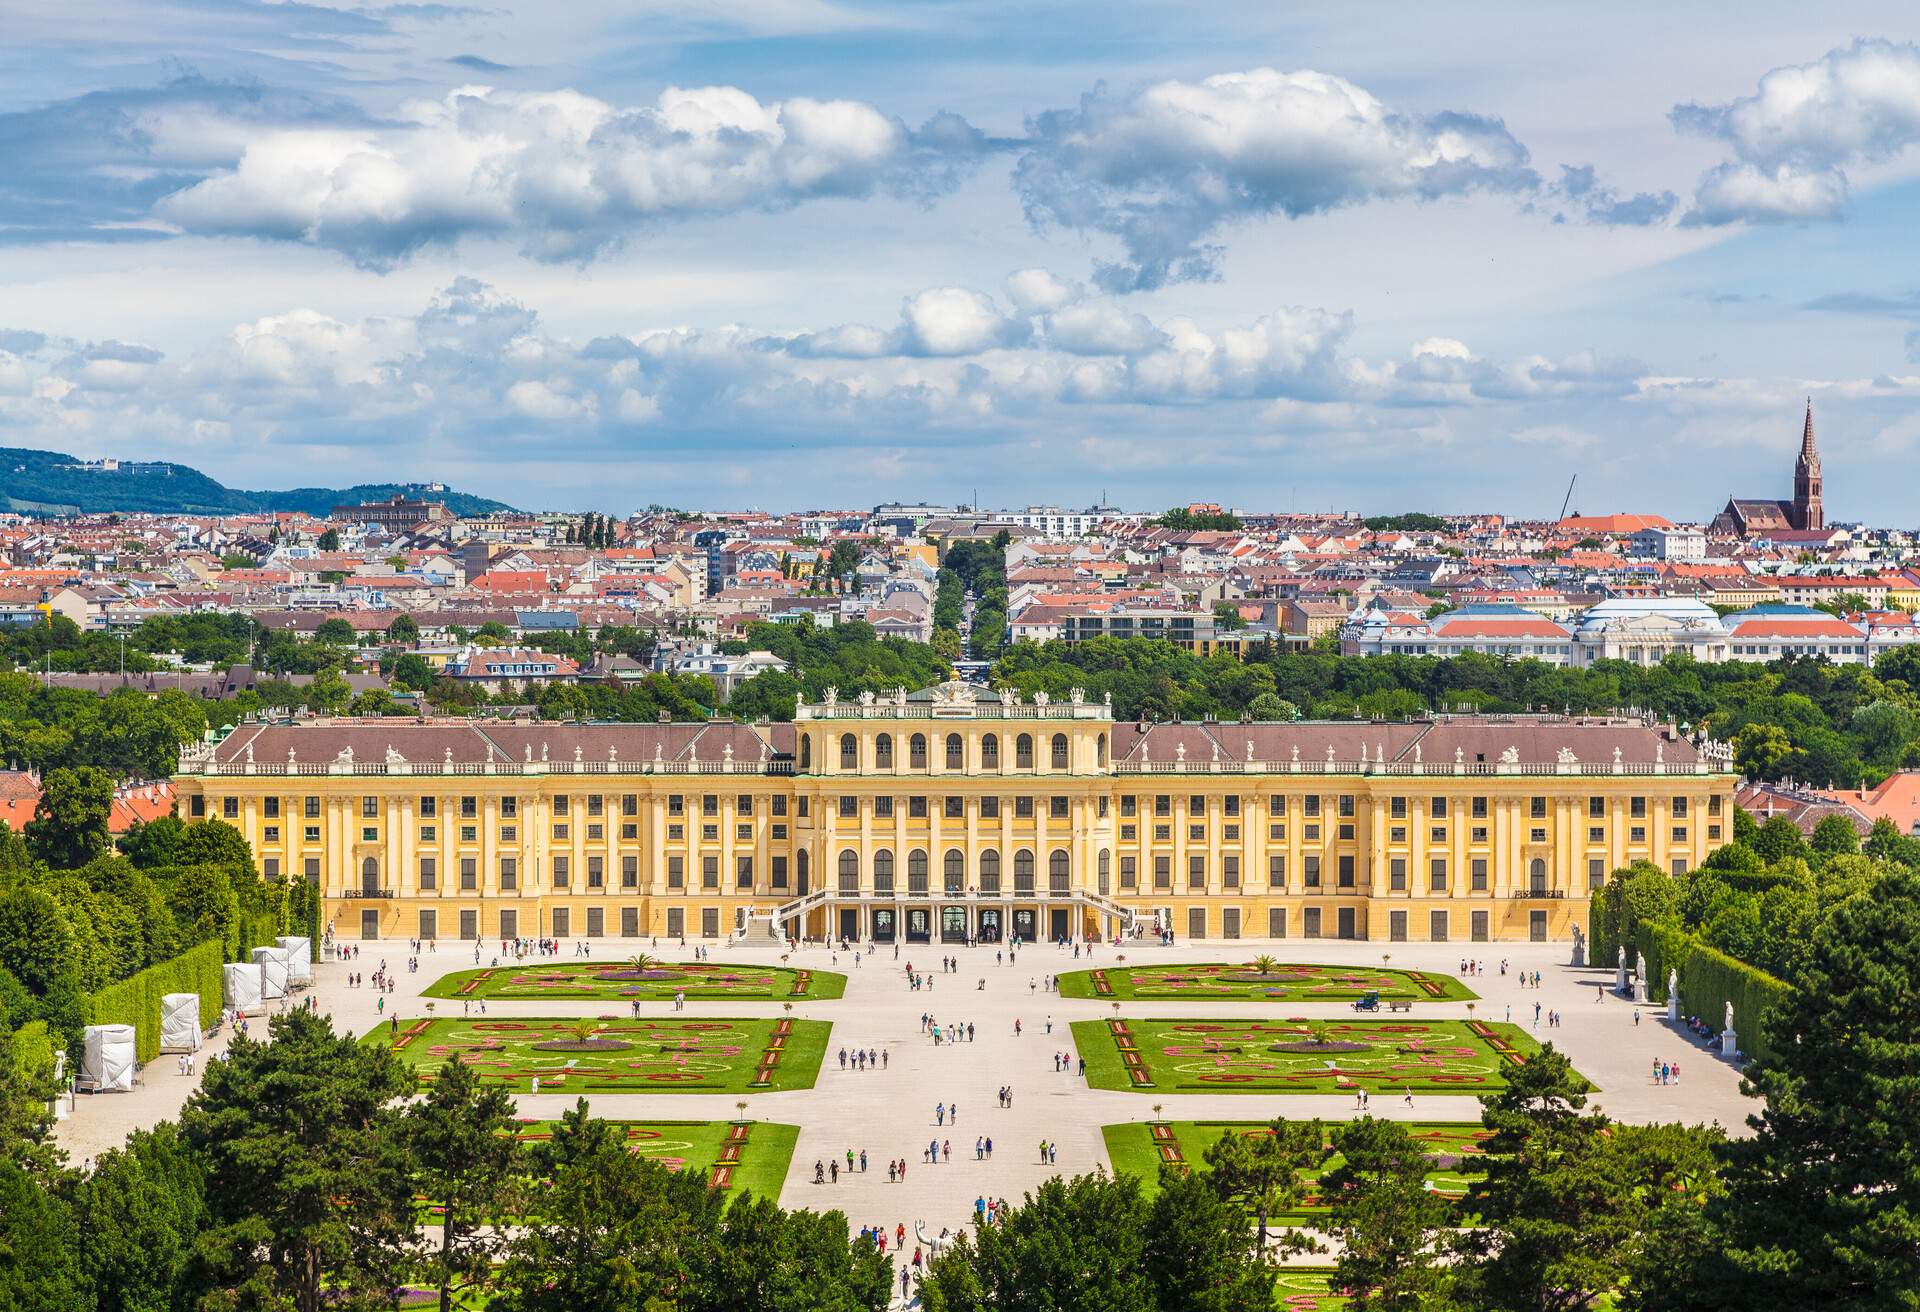 Classic view of famous Schonbrunn Palace with scenic Great Parterre garden on a beautiful sunny day with blue sky and clouds in summer, Vienna, Austria; Shutterstock ID 583714789